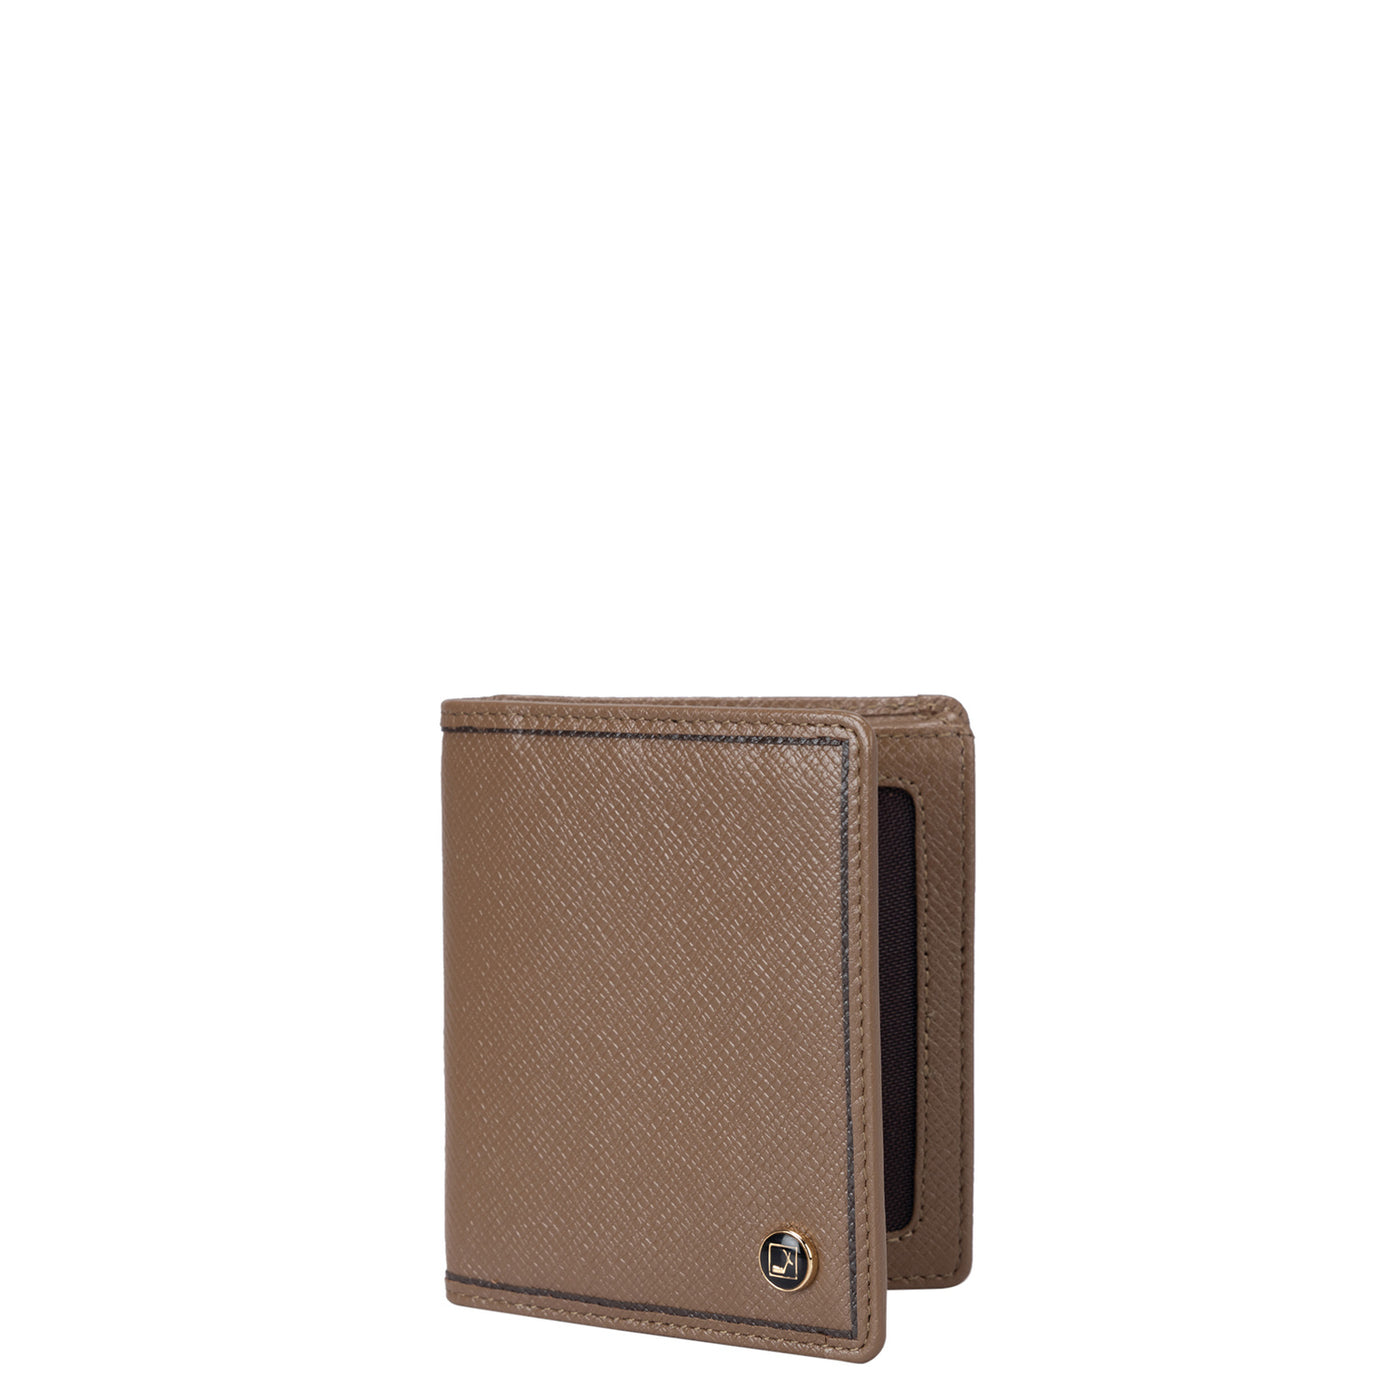 Franzy Leather Mens Wallet - Cafe